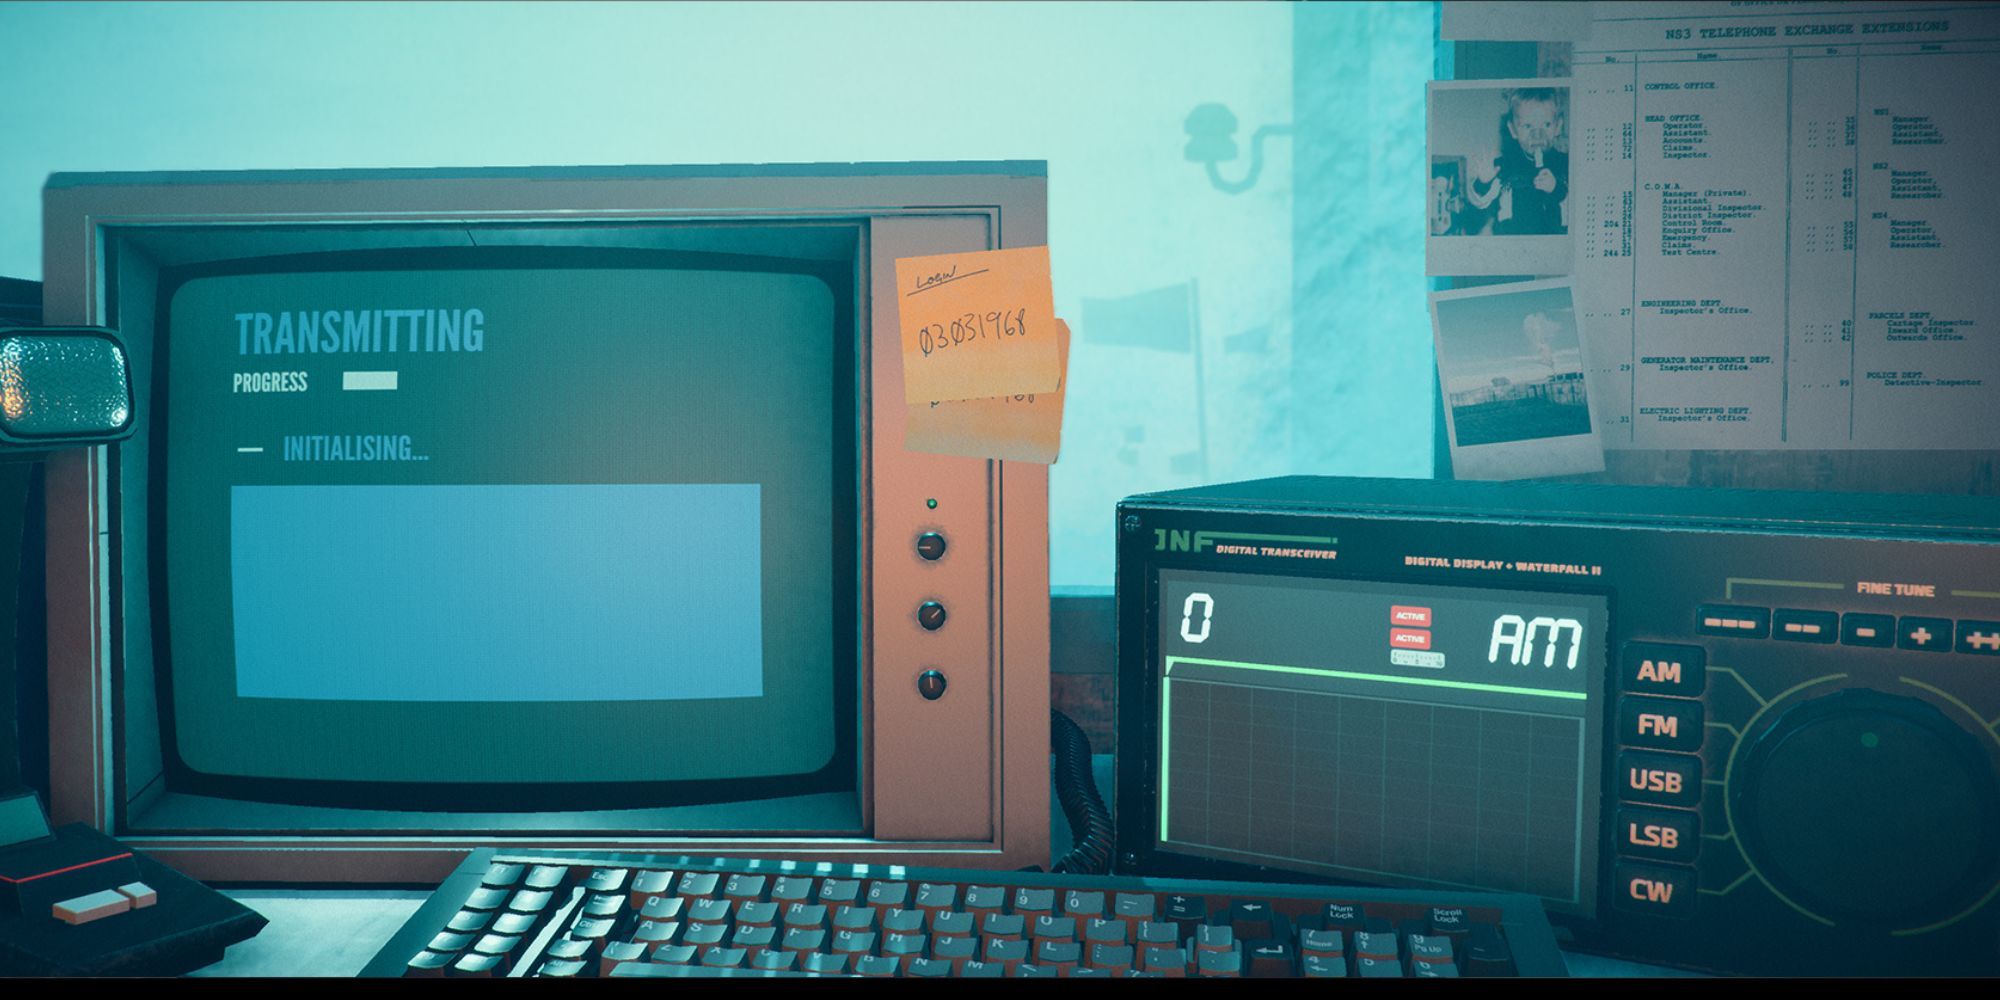 An old screen with a post-it note shows a transmission in progress while the digital transmitter is set to O AM